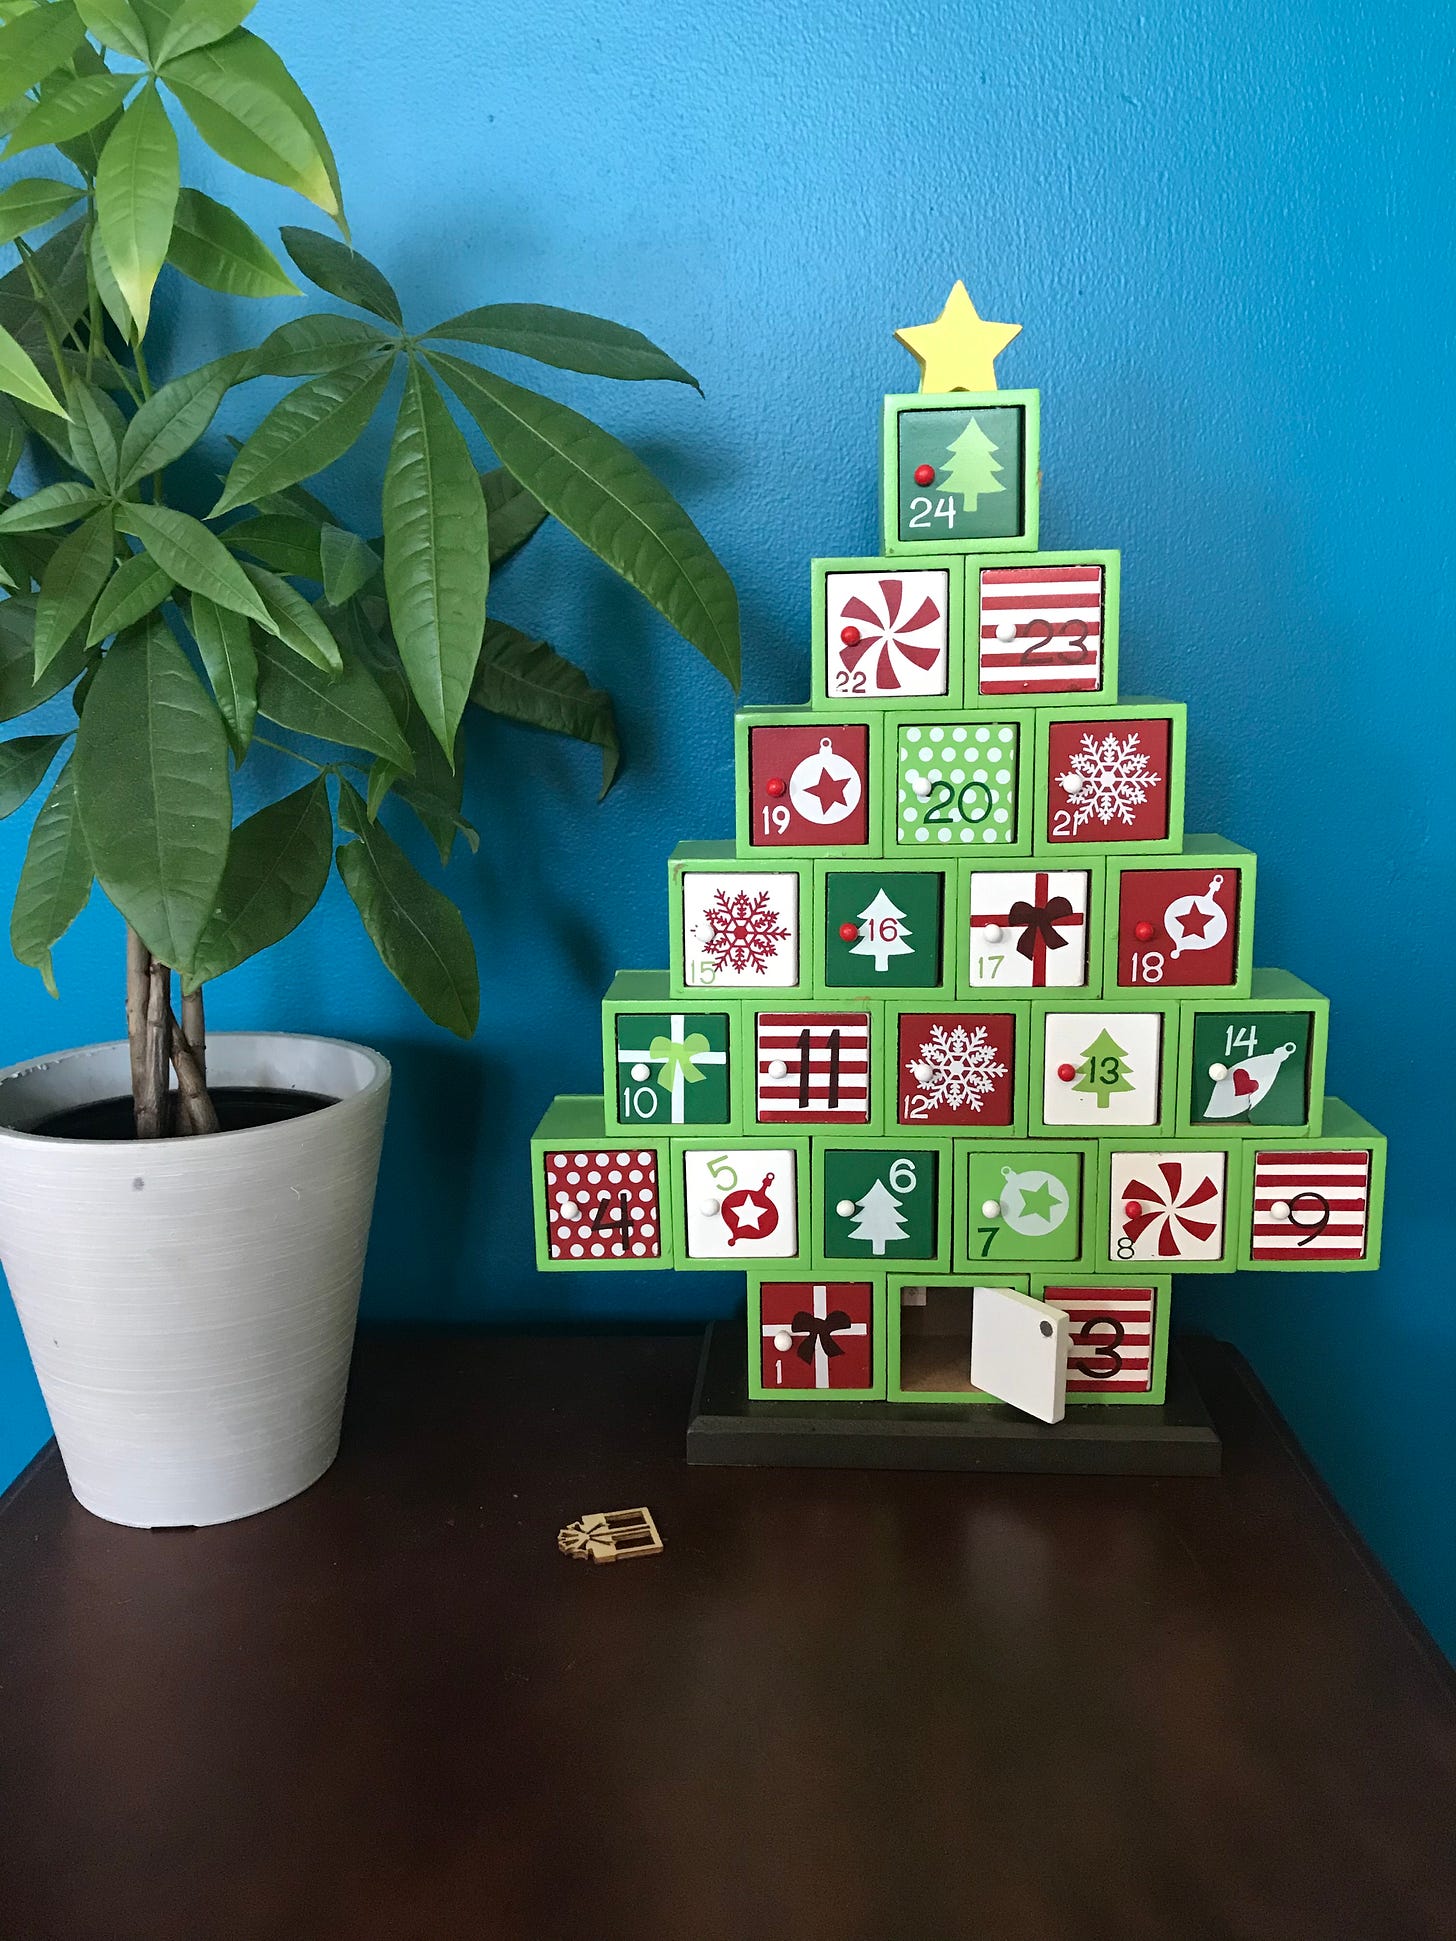 A wood table-top advent calendar in the shape of a Christmas tree. Small red and green doors open and climb up the tree to the top. Beside the advent calendar, a money tree. Behind both, a peacock blue wall.